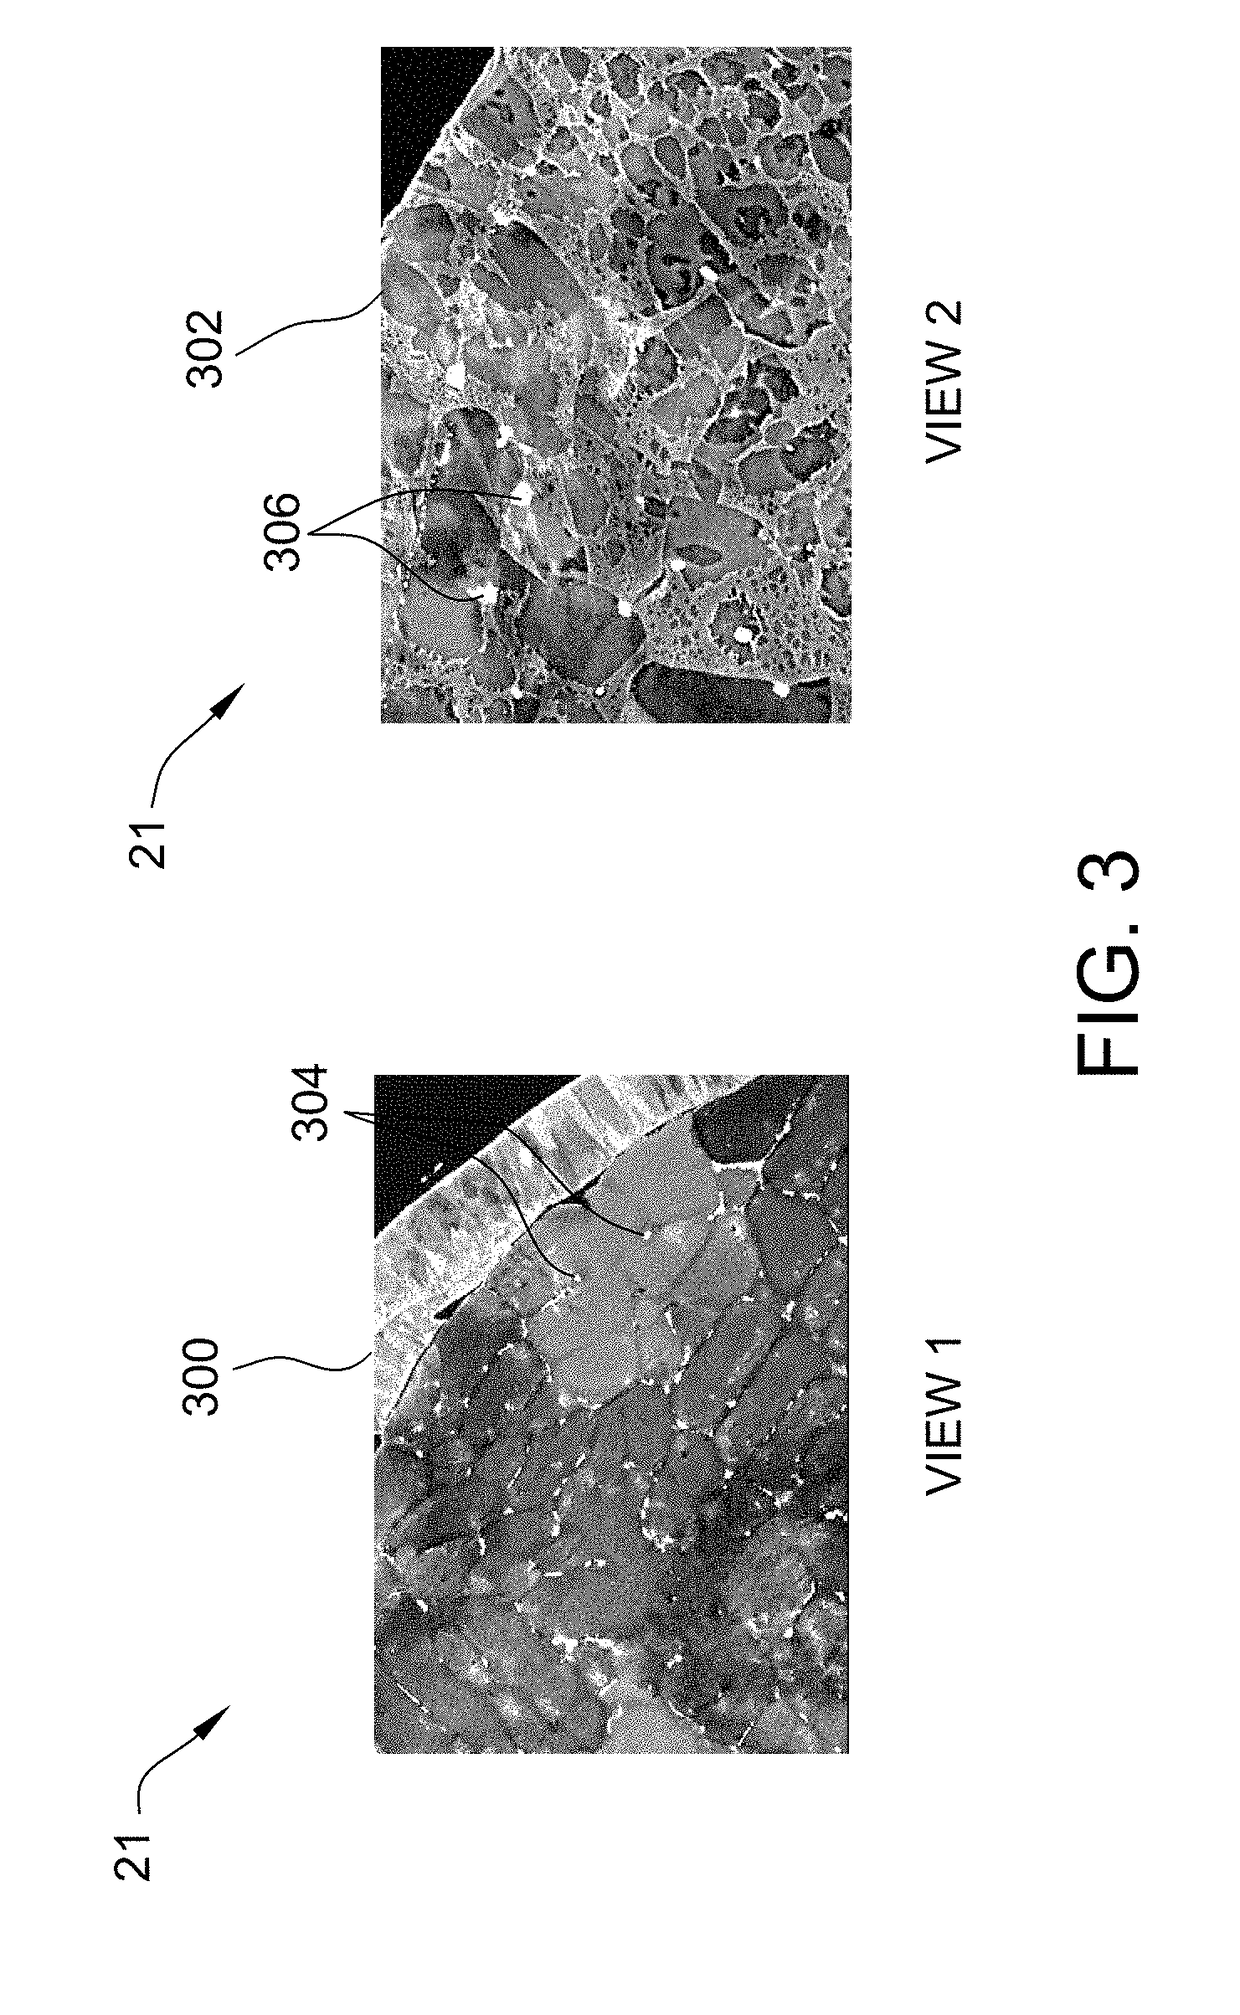 Systems and methods for powder pretreatment in additive manufacturing